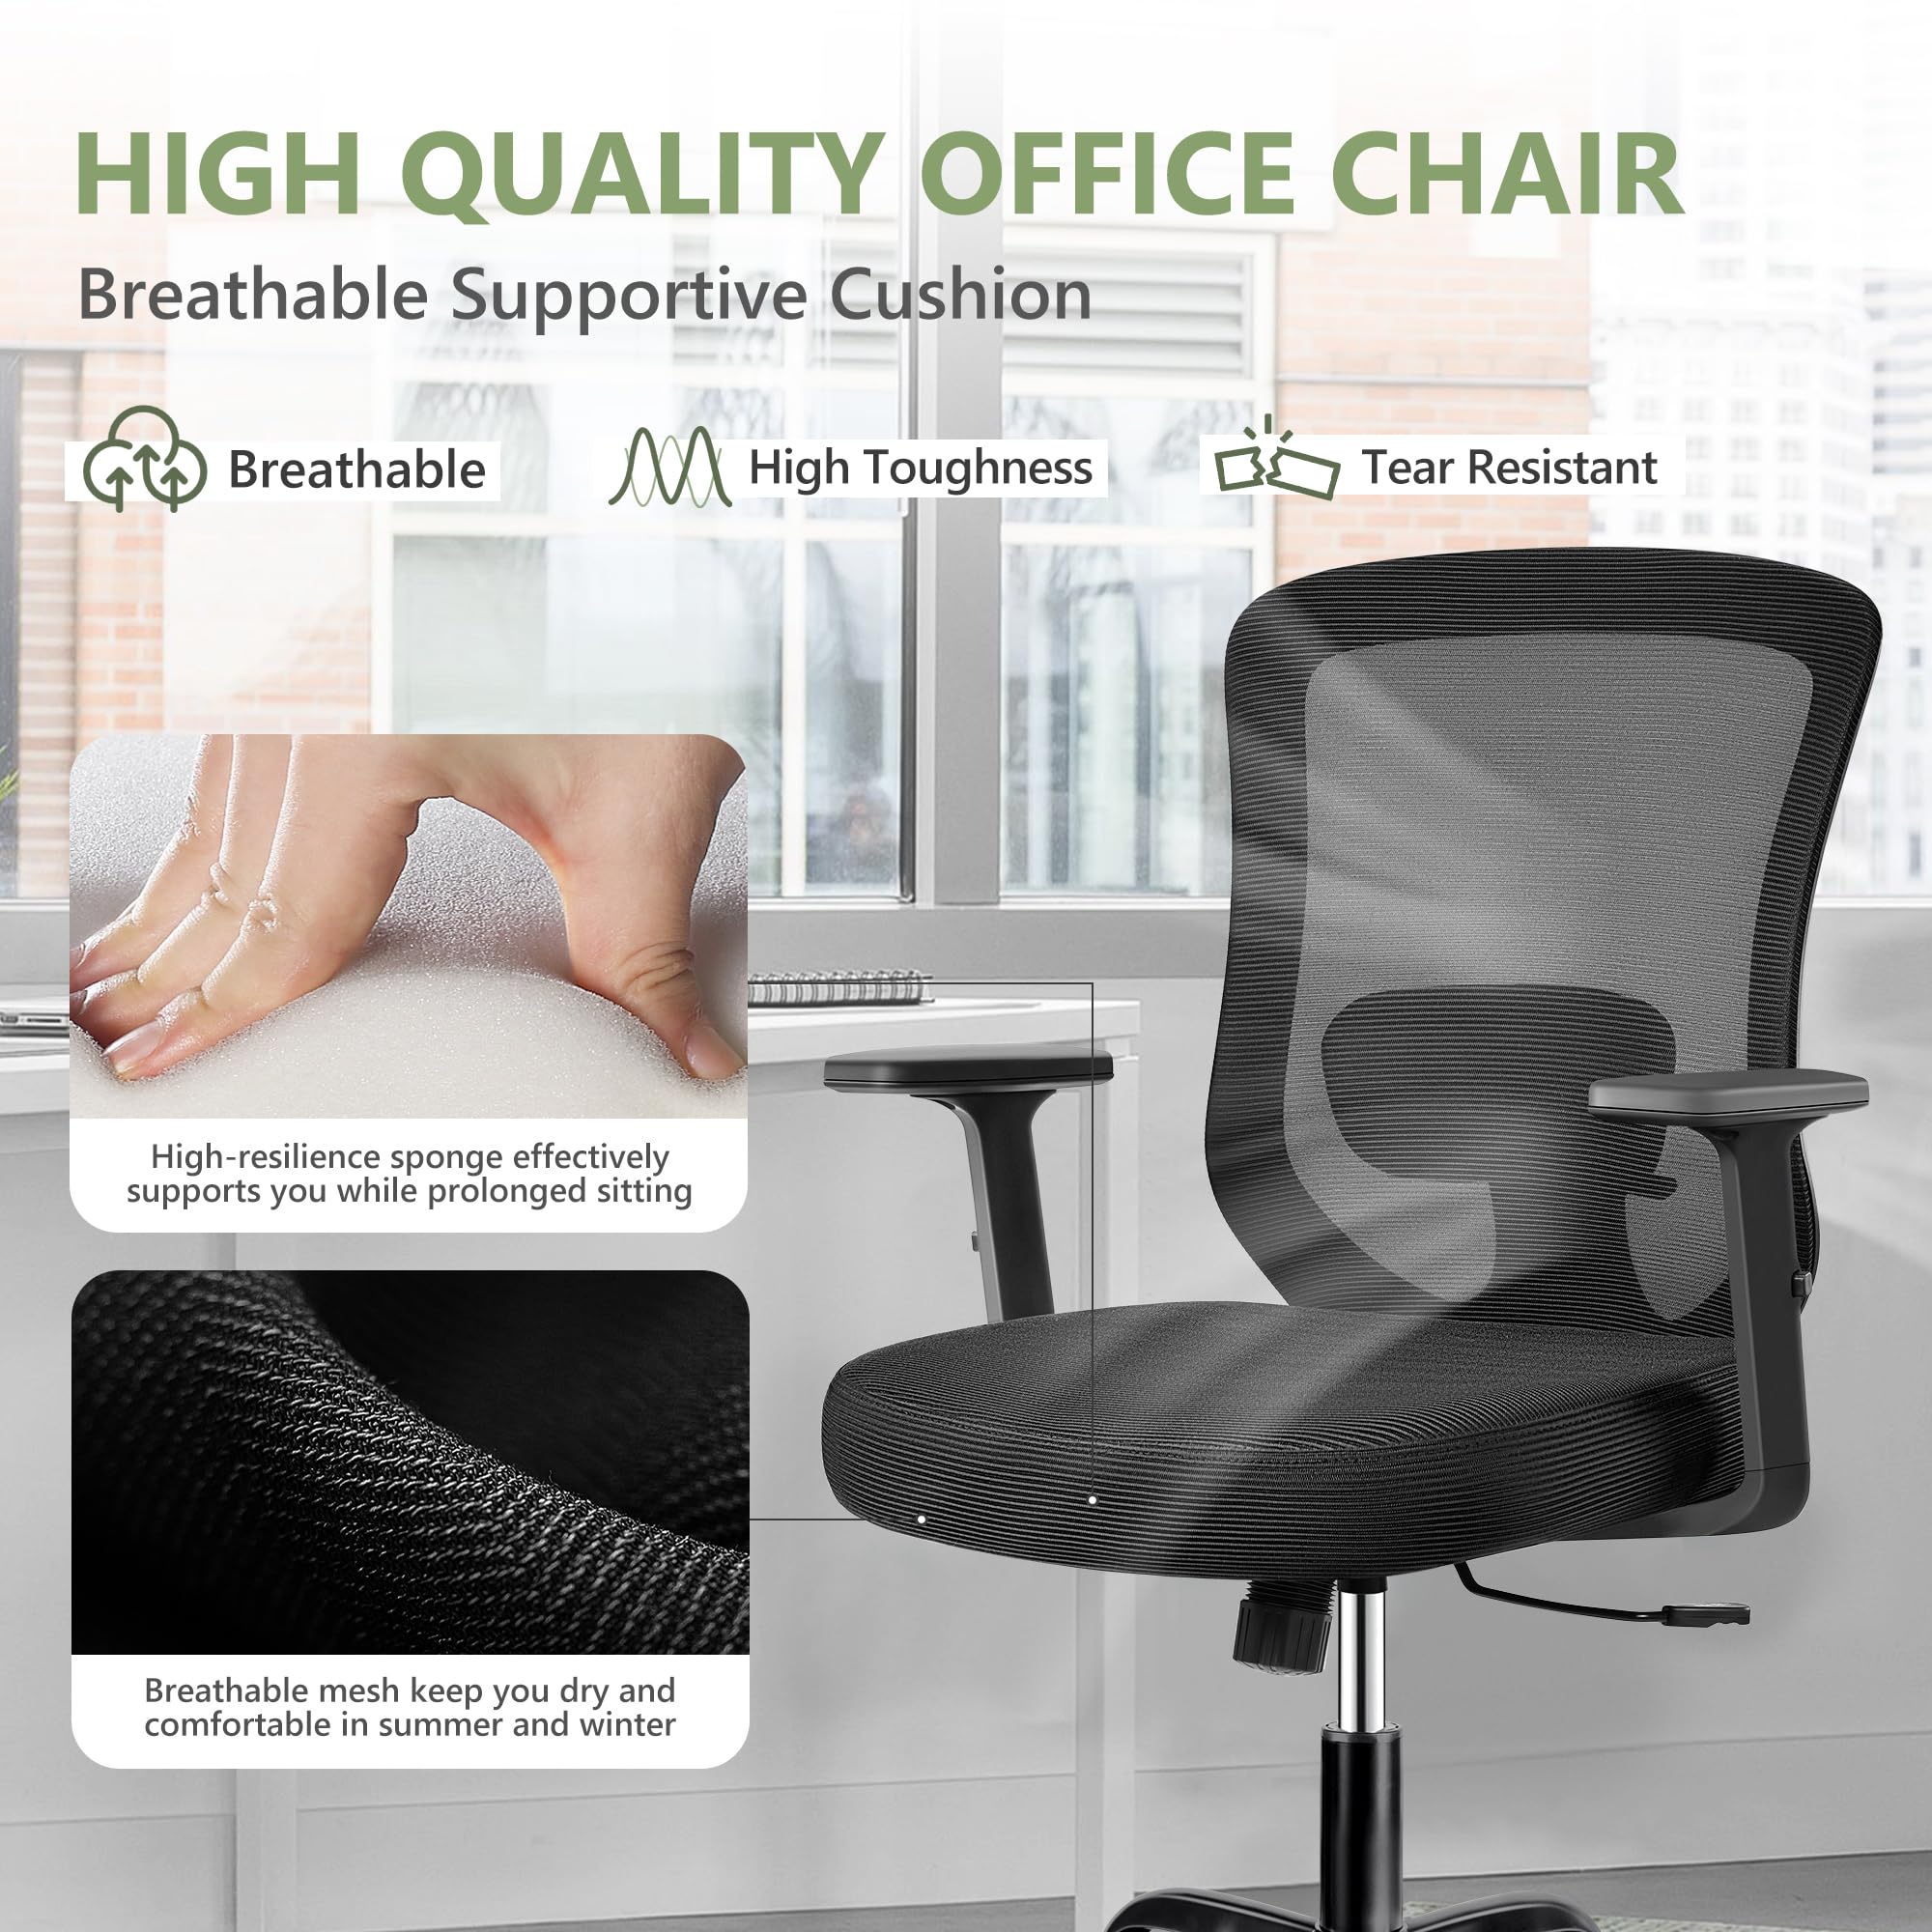 Winrise Office Chair, Ergonomic Home Office Desk Chairs, Breathable Mesh Comfortable Work Chair Adjustable 2D Armrests, Rocking Executive Chair, Swivel Task Chair with Lumbar Support (Black)